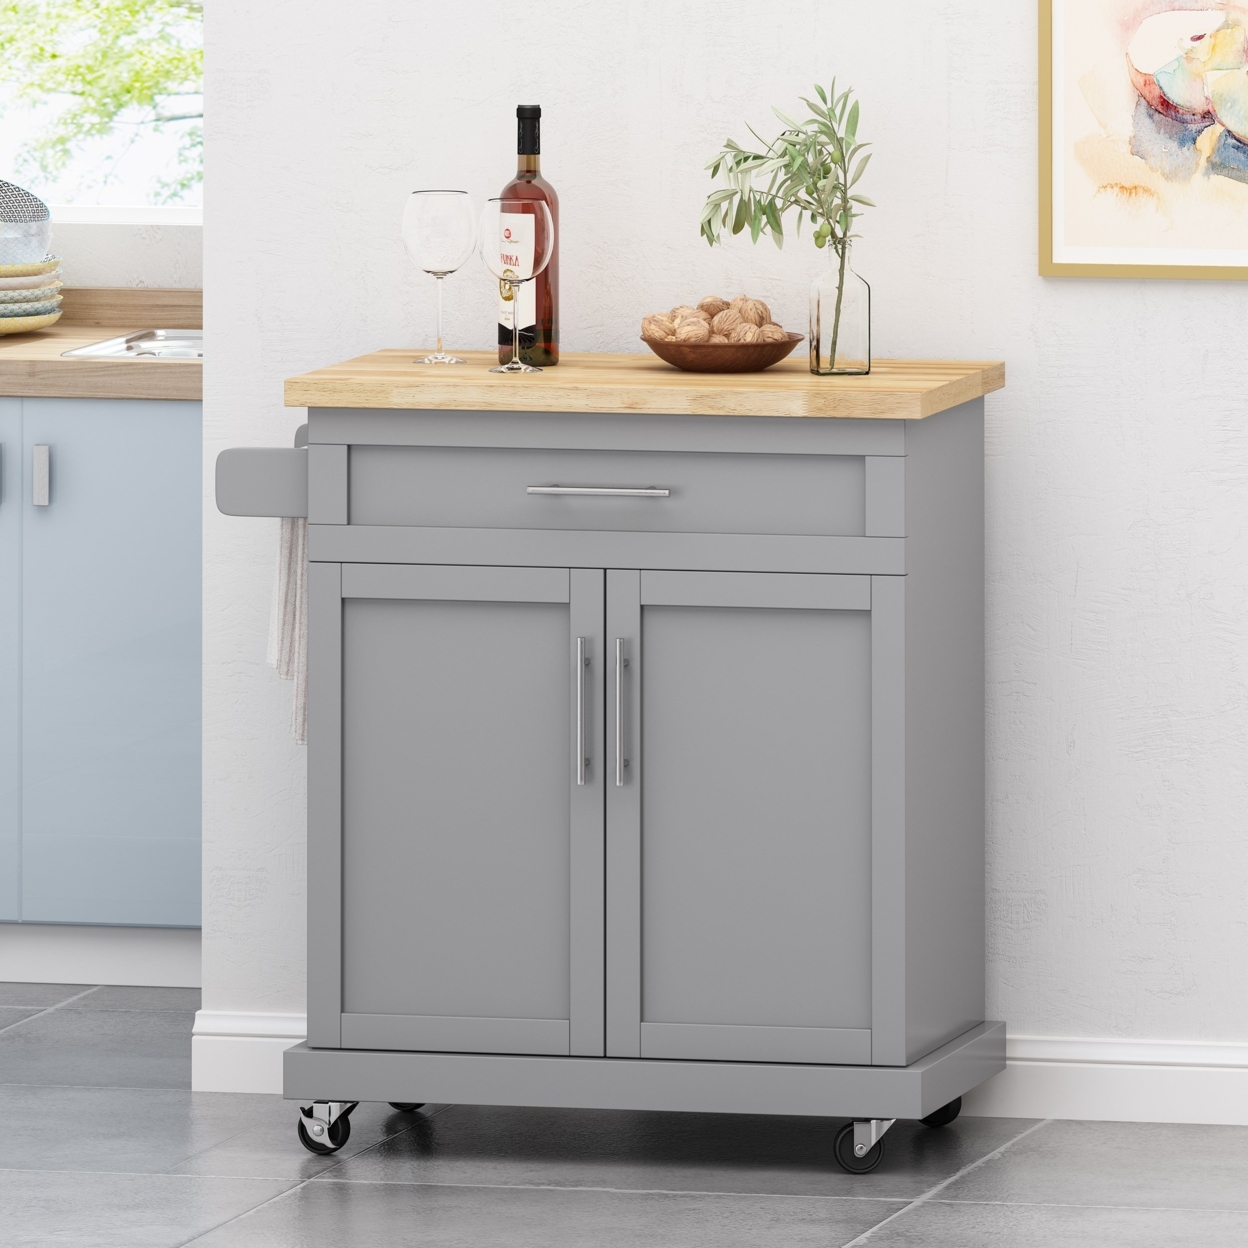 Negley Contemporary Kitchen Cart With Wheels - Black/natural